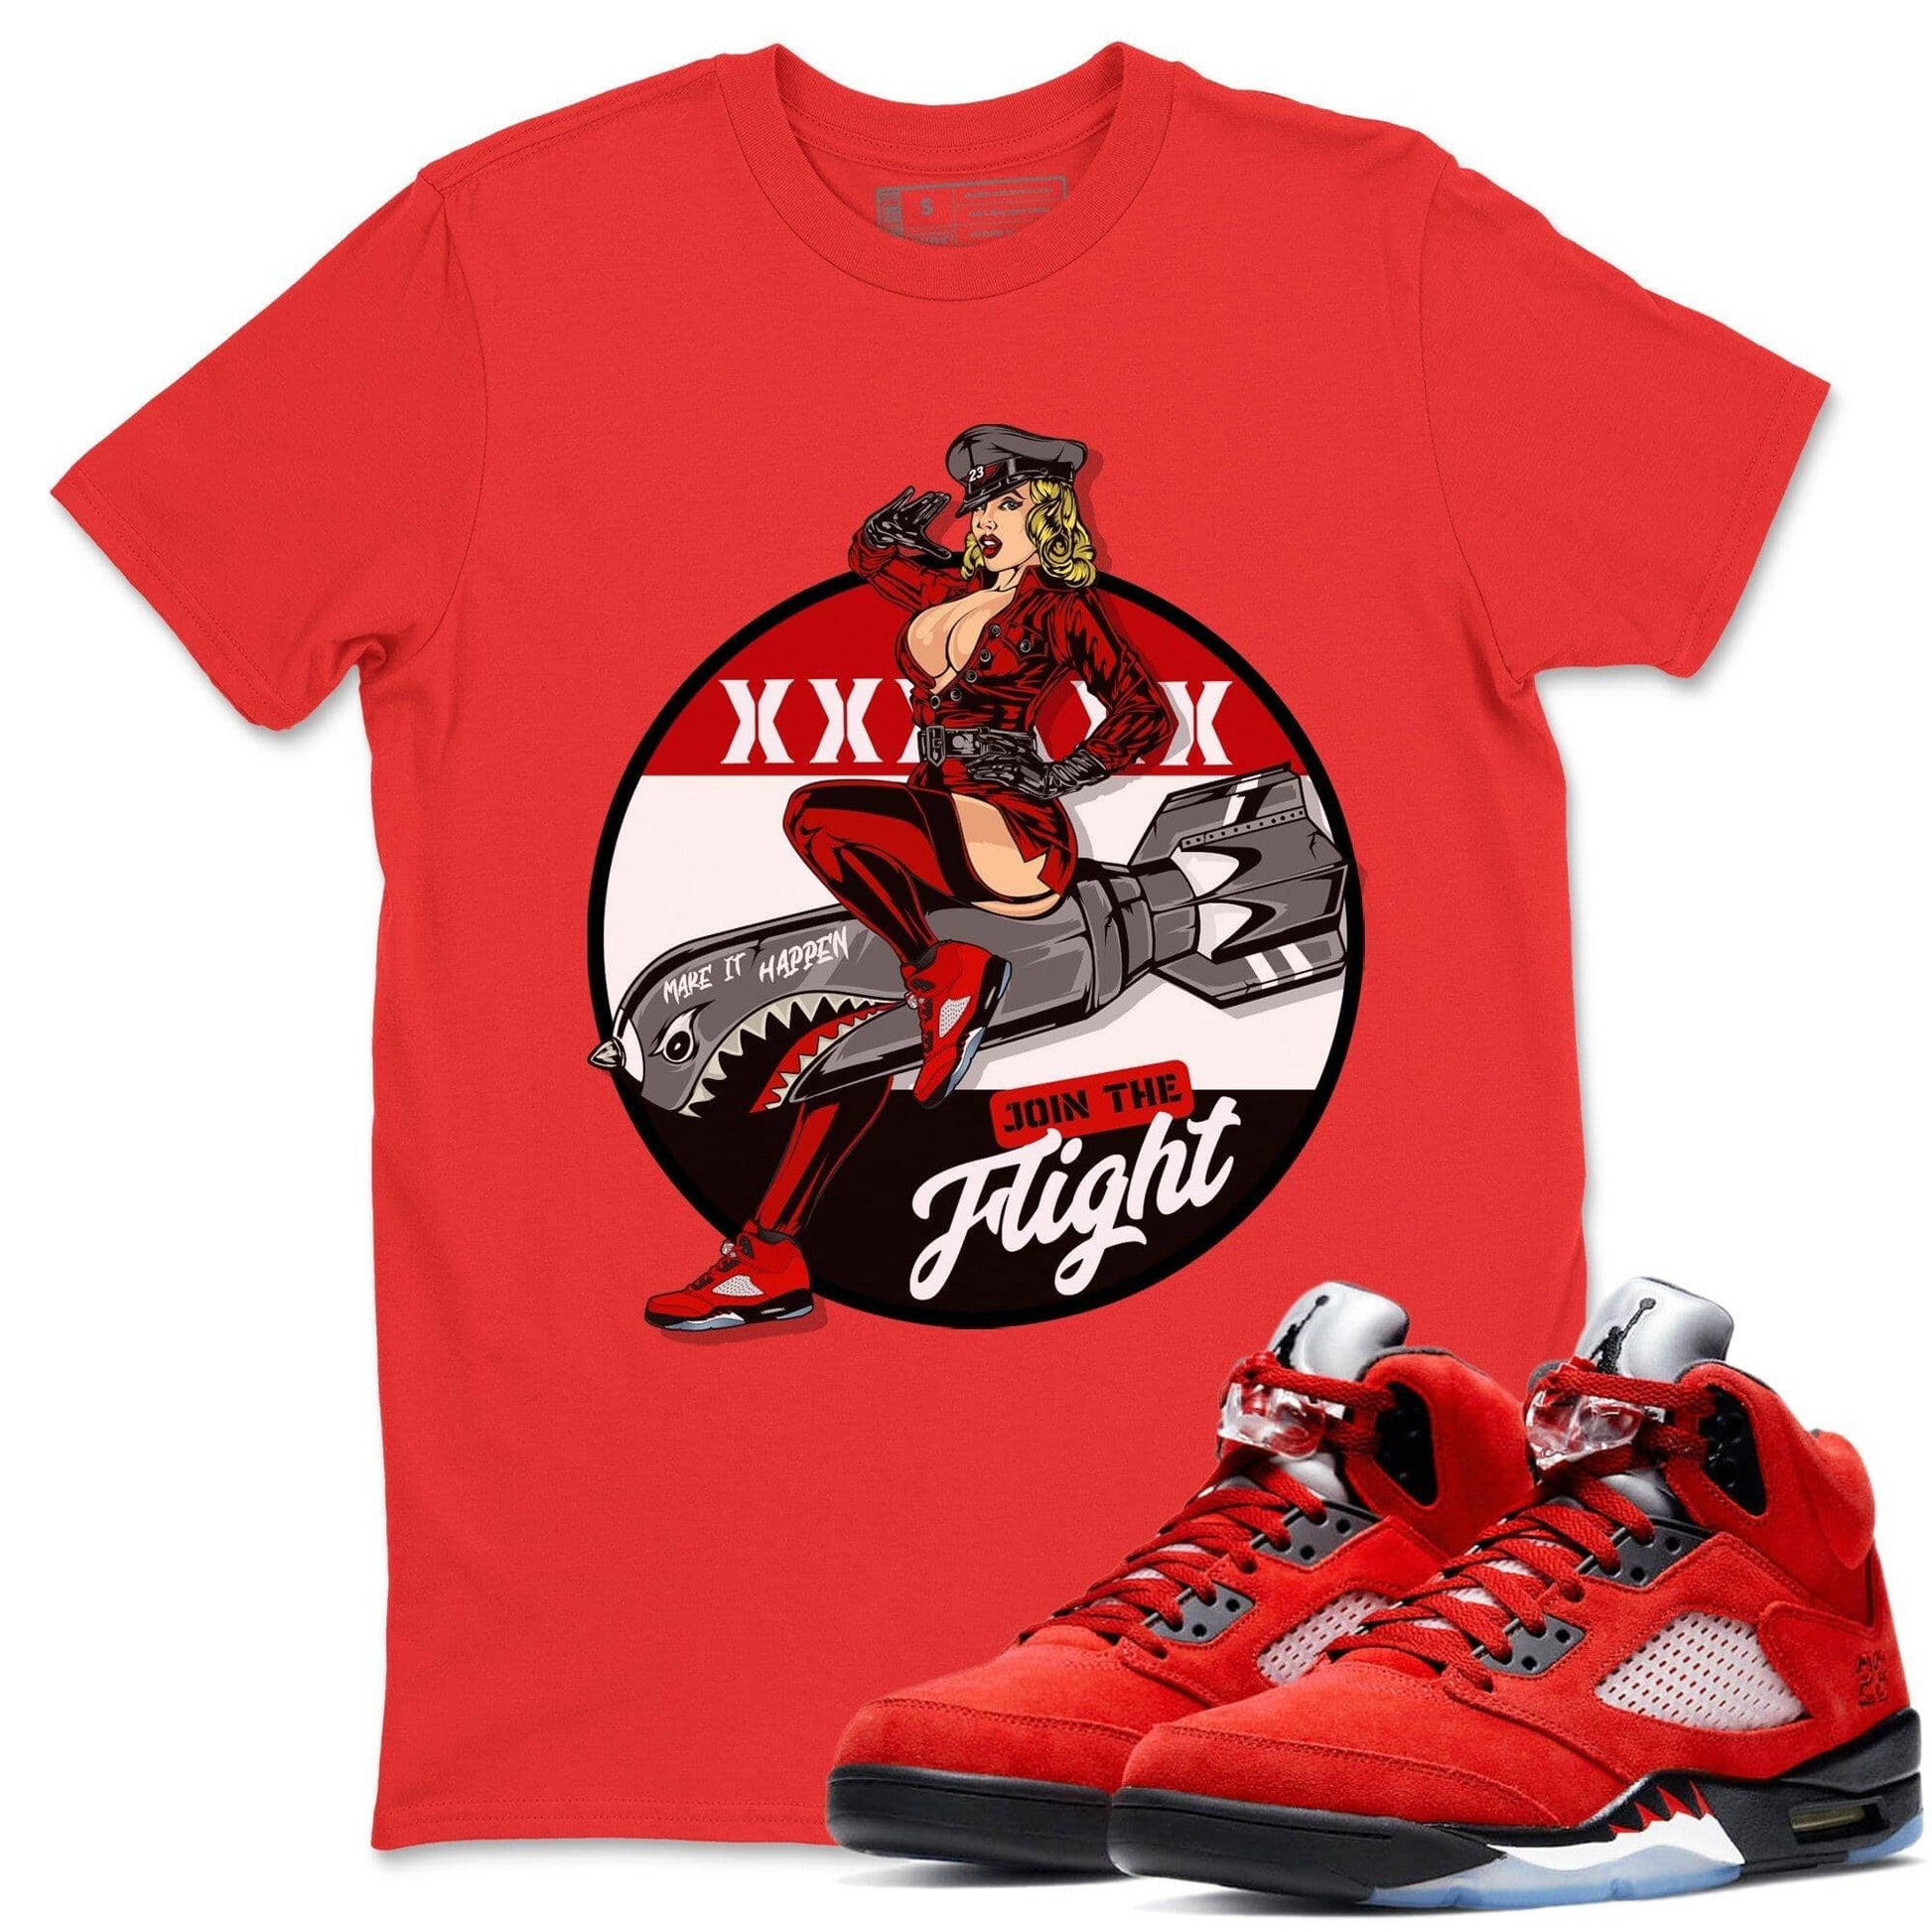 Retro 5 Raging Bull Shirts to complete your outfit